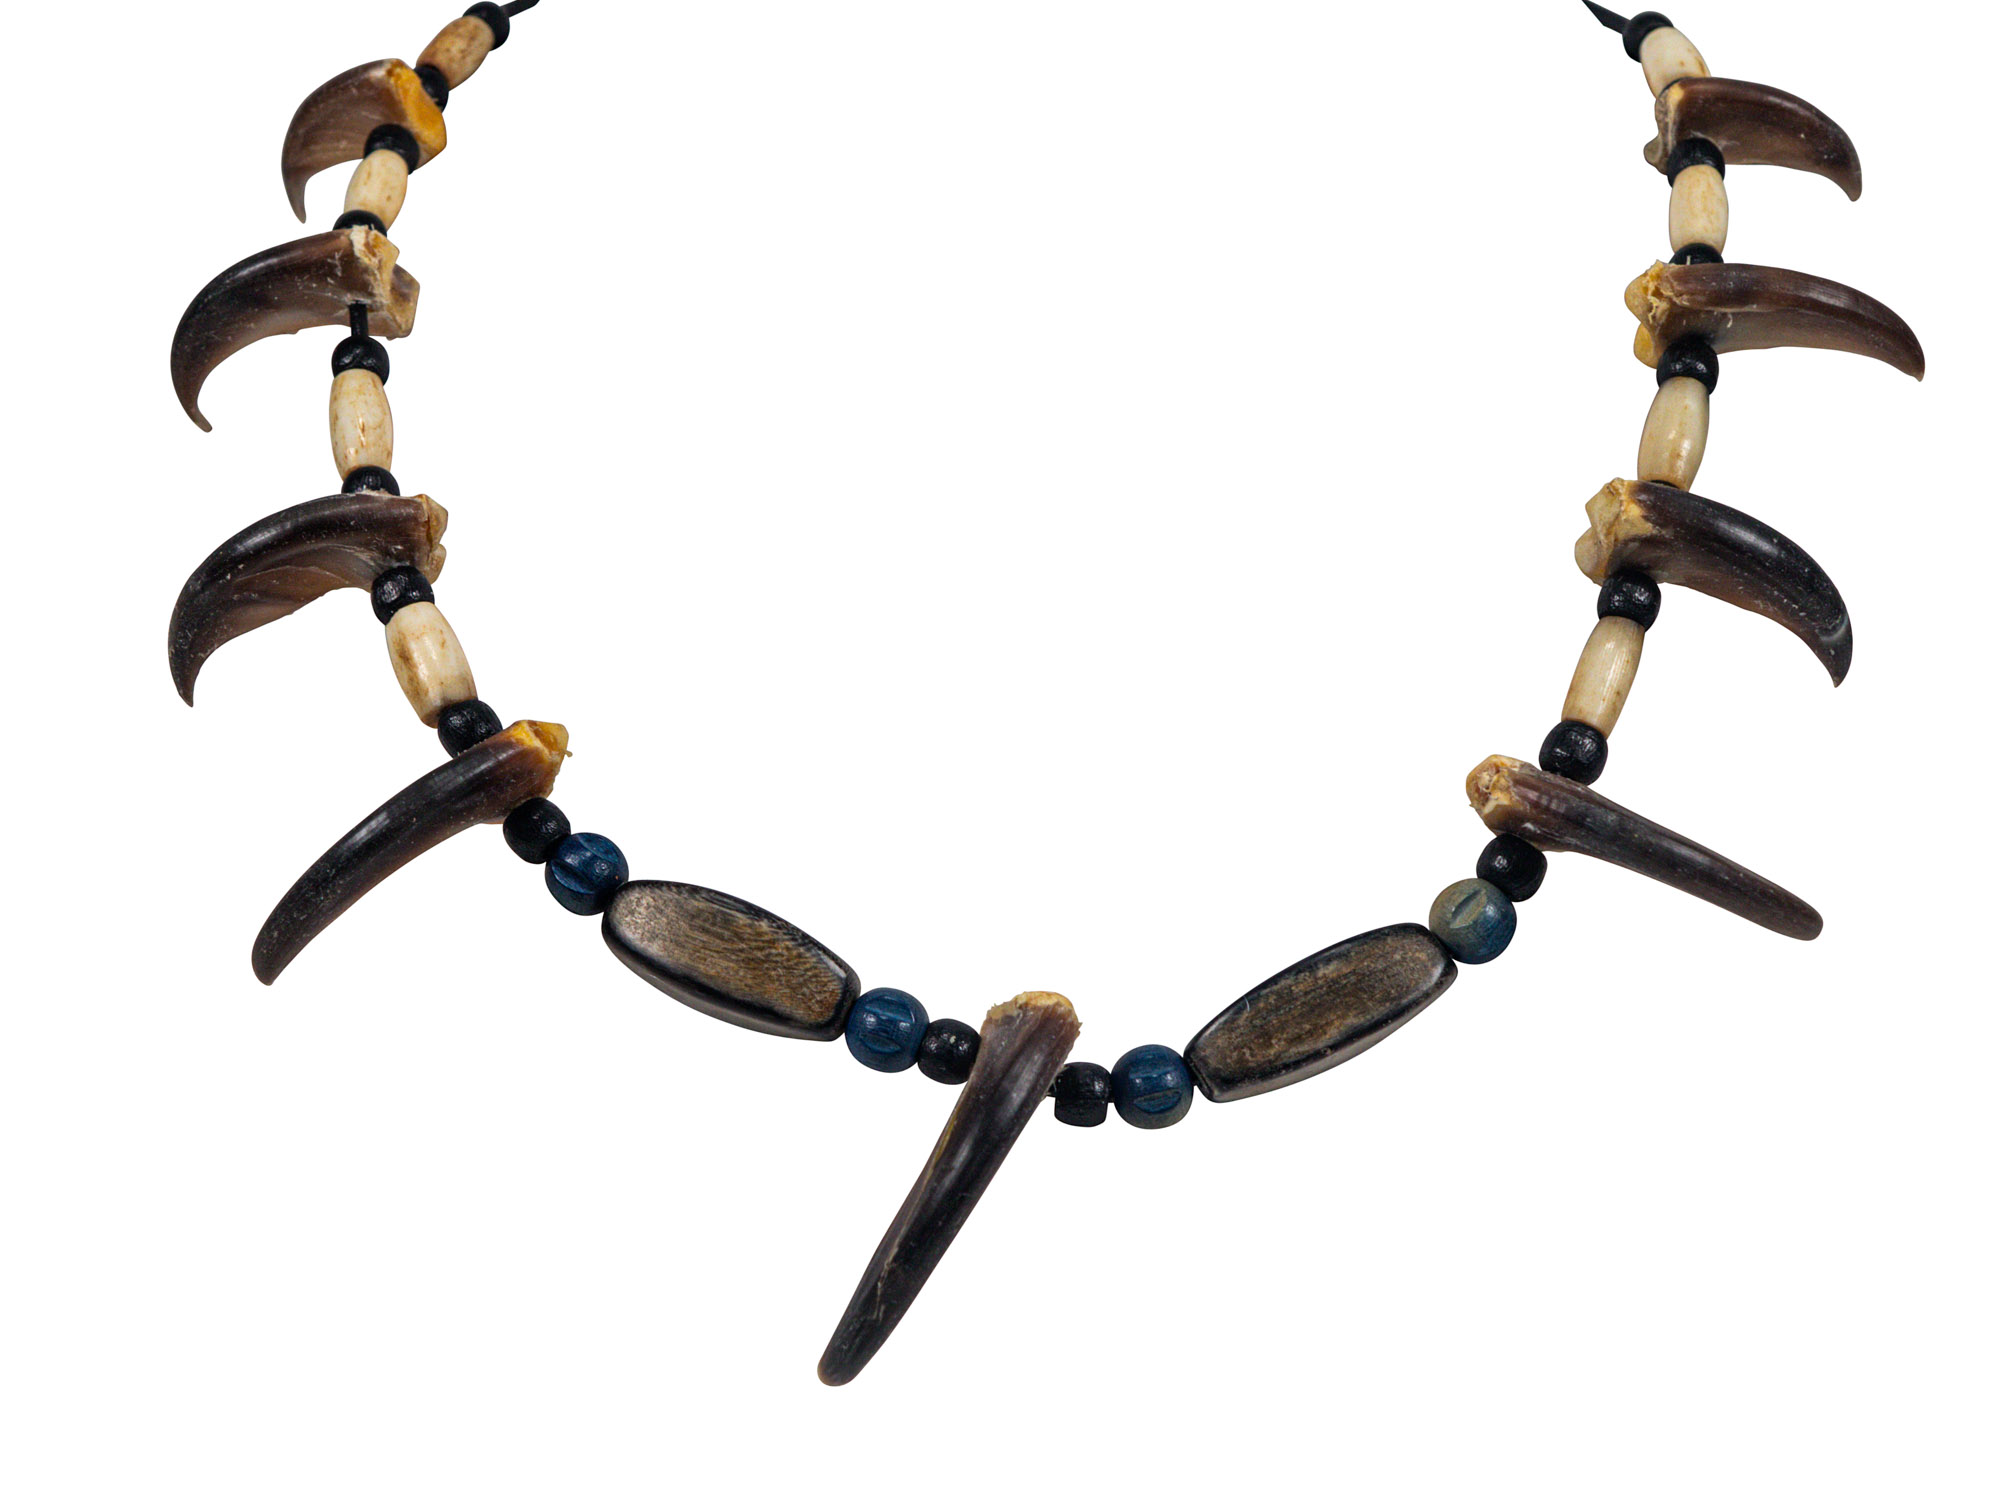 Black Bear Claw Necklace with Turquoise and Heishi and Fetish Beads